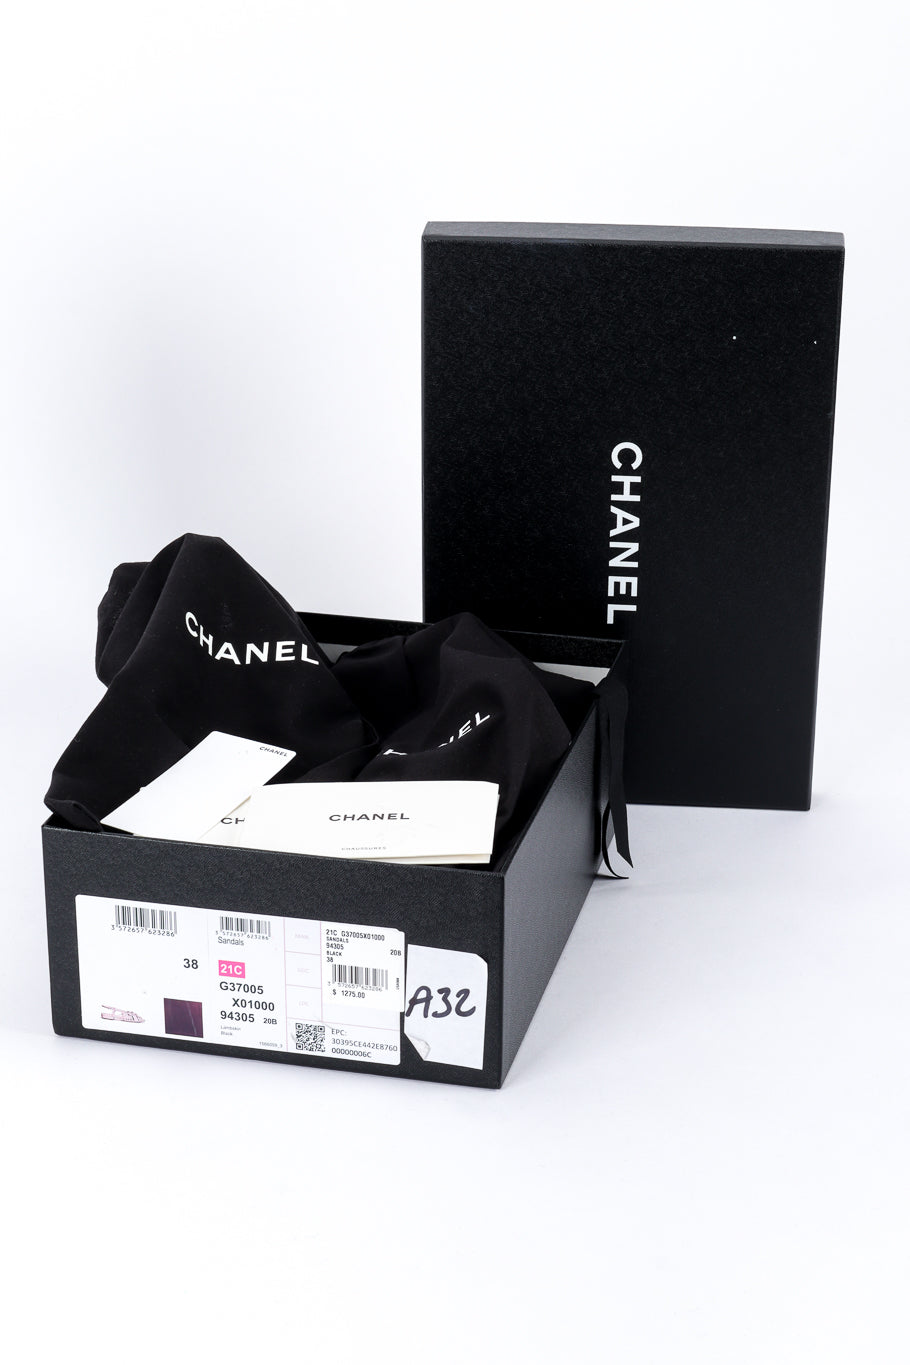 Chanel Camellia Flower Slingback Sandals with box and dust bags @recess la